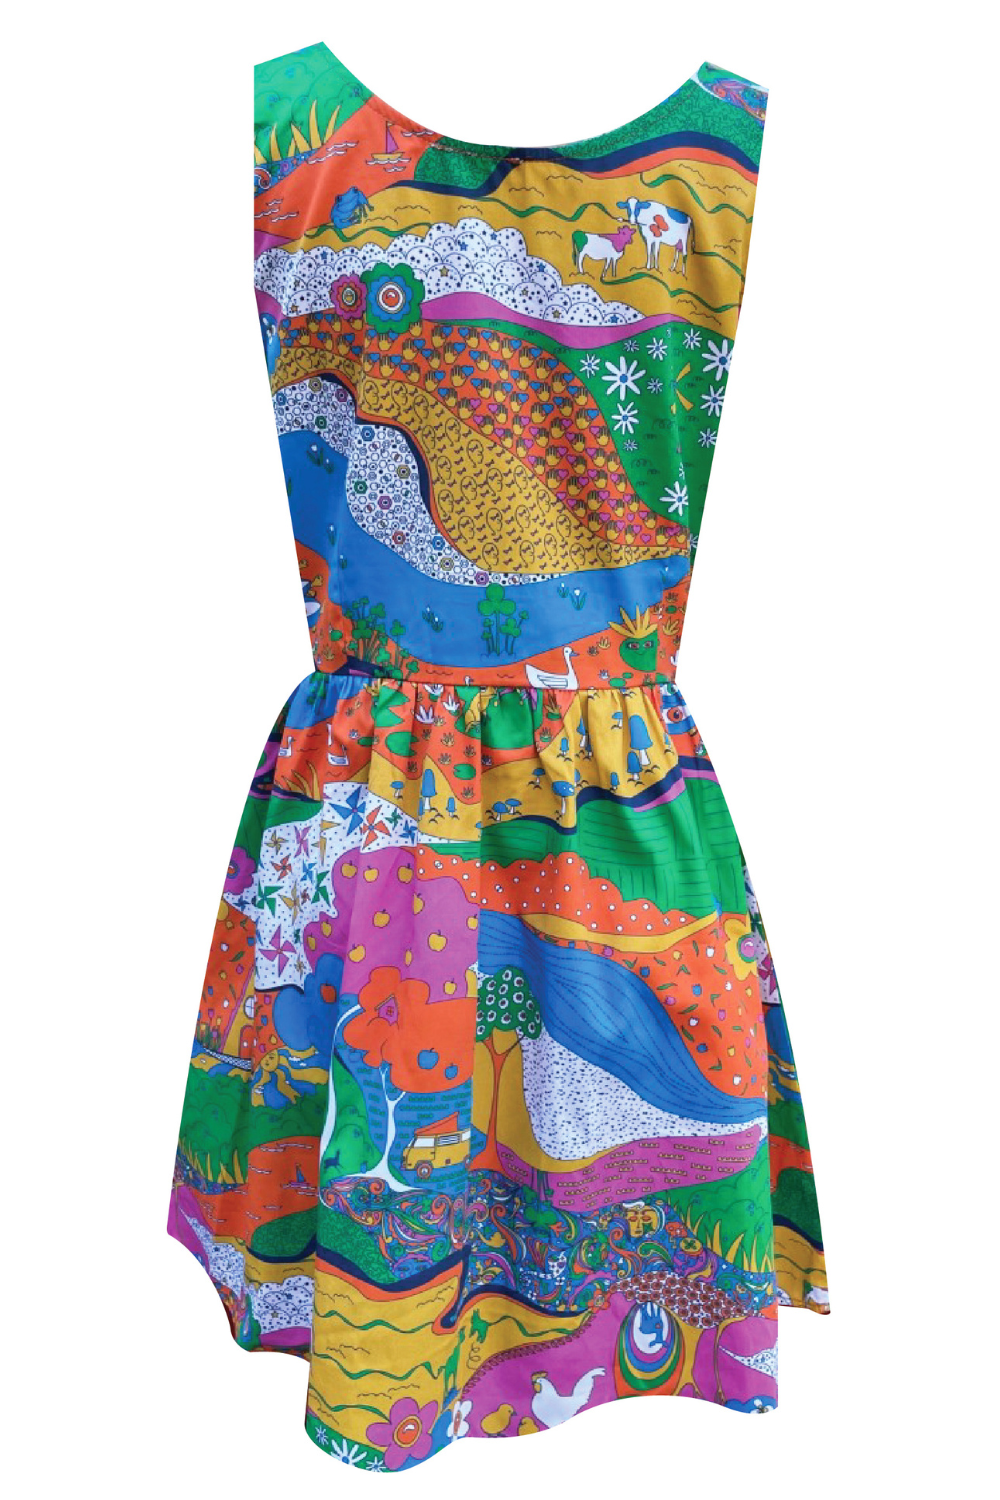 Back view of zip-front sleeveless fit and flare multicolor dress with side pockets, animals, farms and landscape print